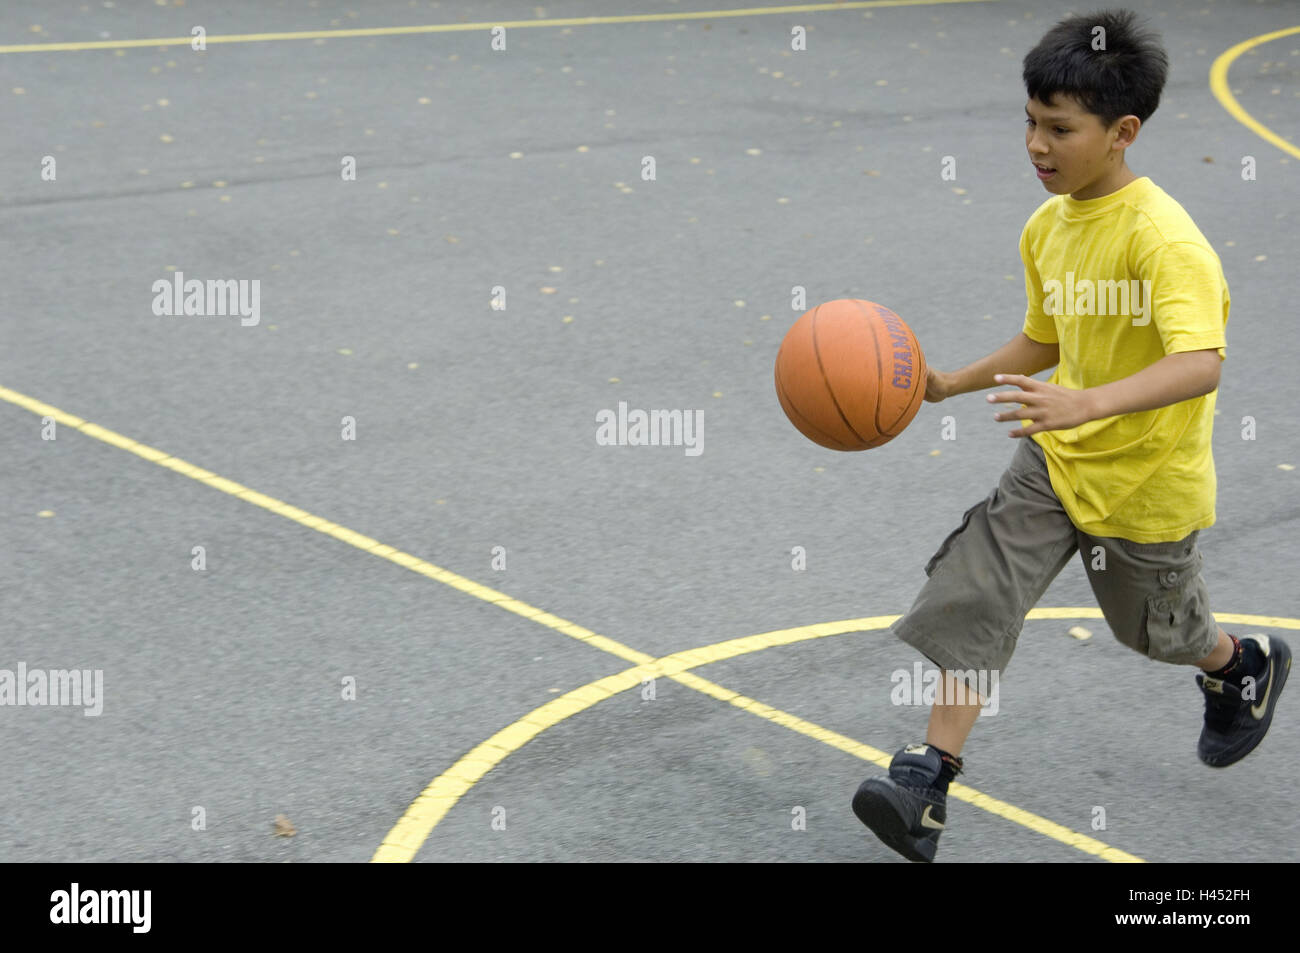 Boy, basketball, play, dribble, model released, people, child, only, sport, ball sport, game, leisure time, hobby, activity, play, fun, joy, motion, train, technology, practise, quickness, run, ball, outside, Stock Photo